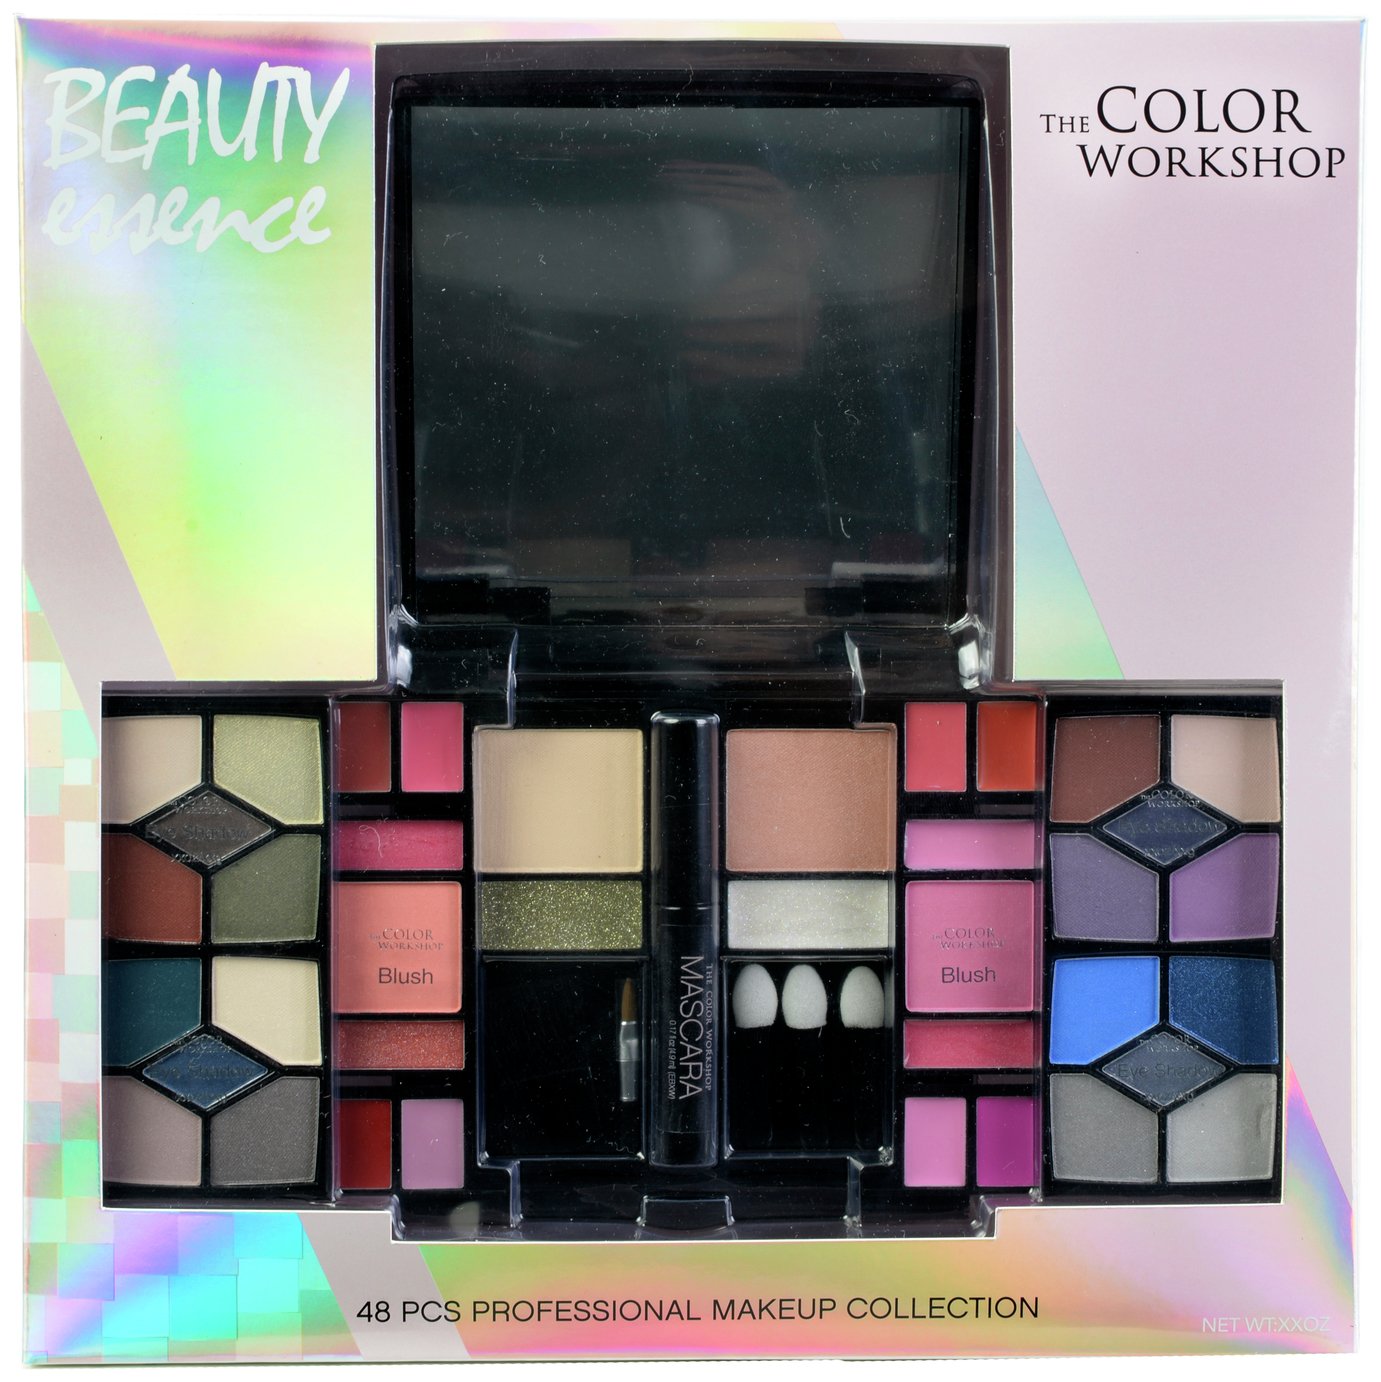 The Color Workshop Beauty Essence Collection